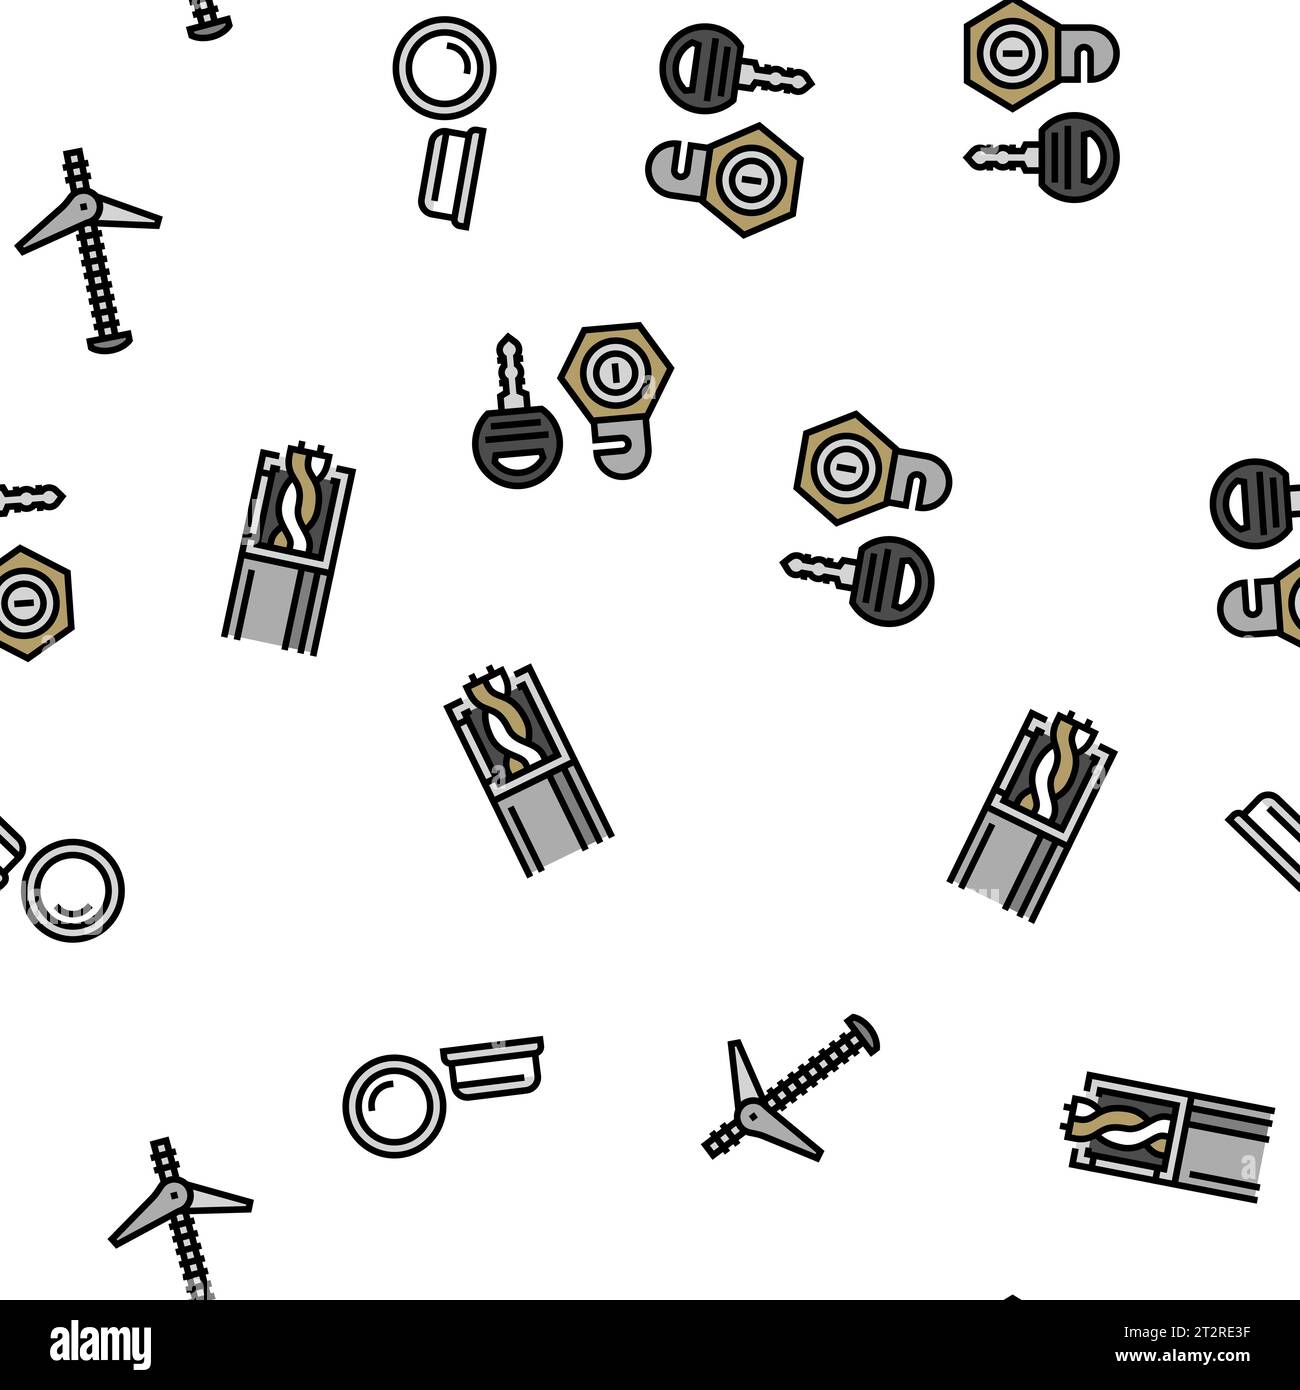 Seamless Construction Tools Pattern-Sublimation Design Download, little boy  sublimation, seamless boy design, tools seam